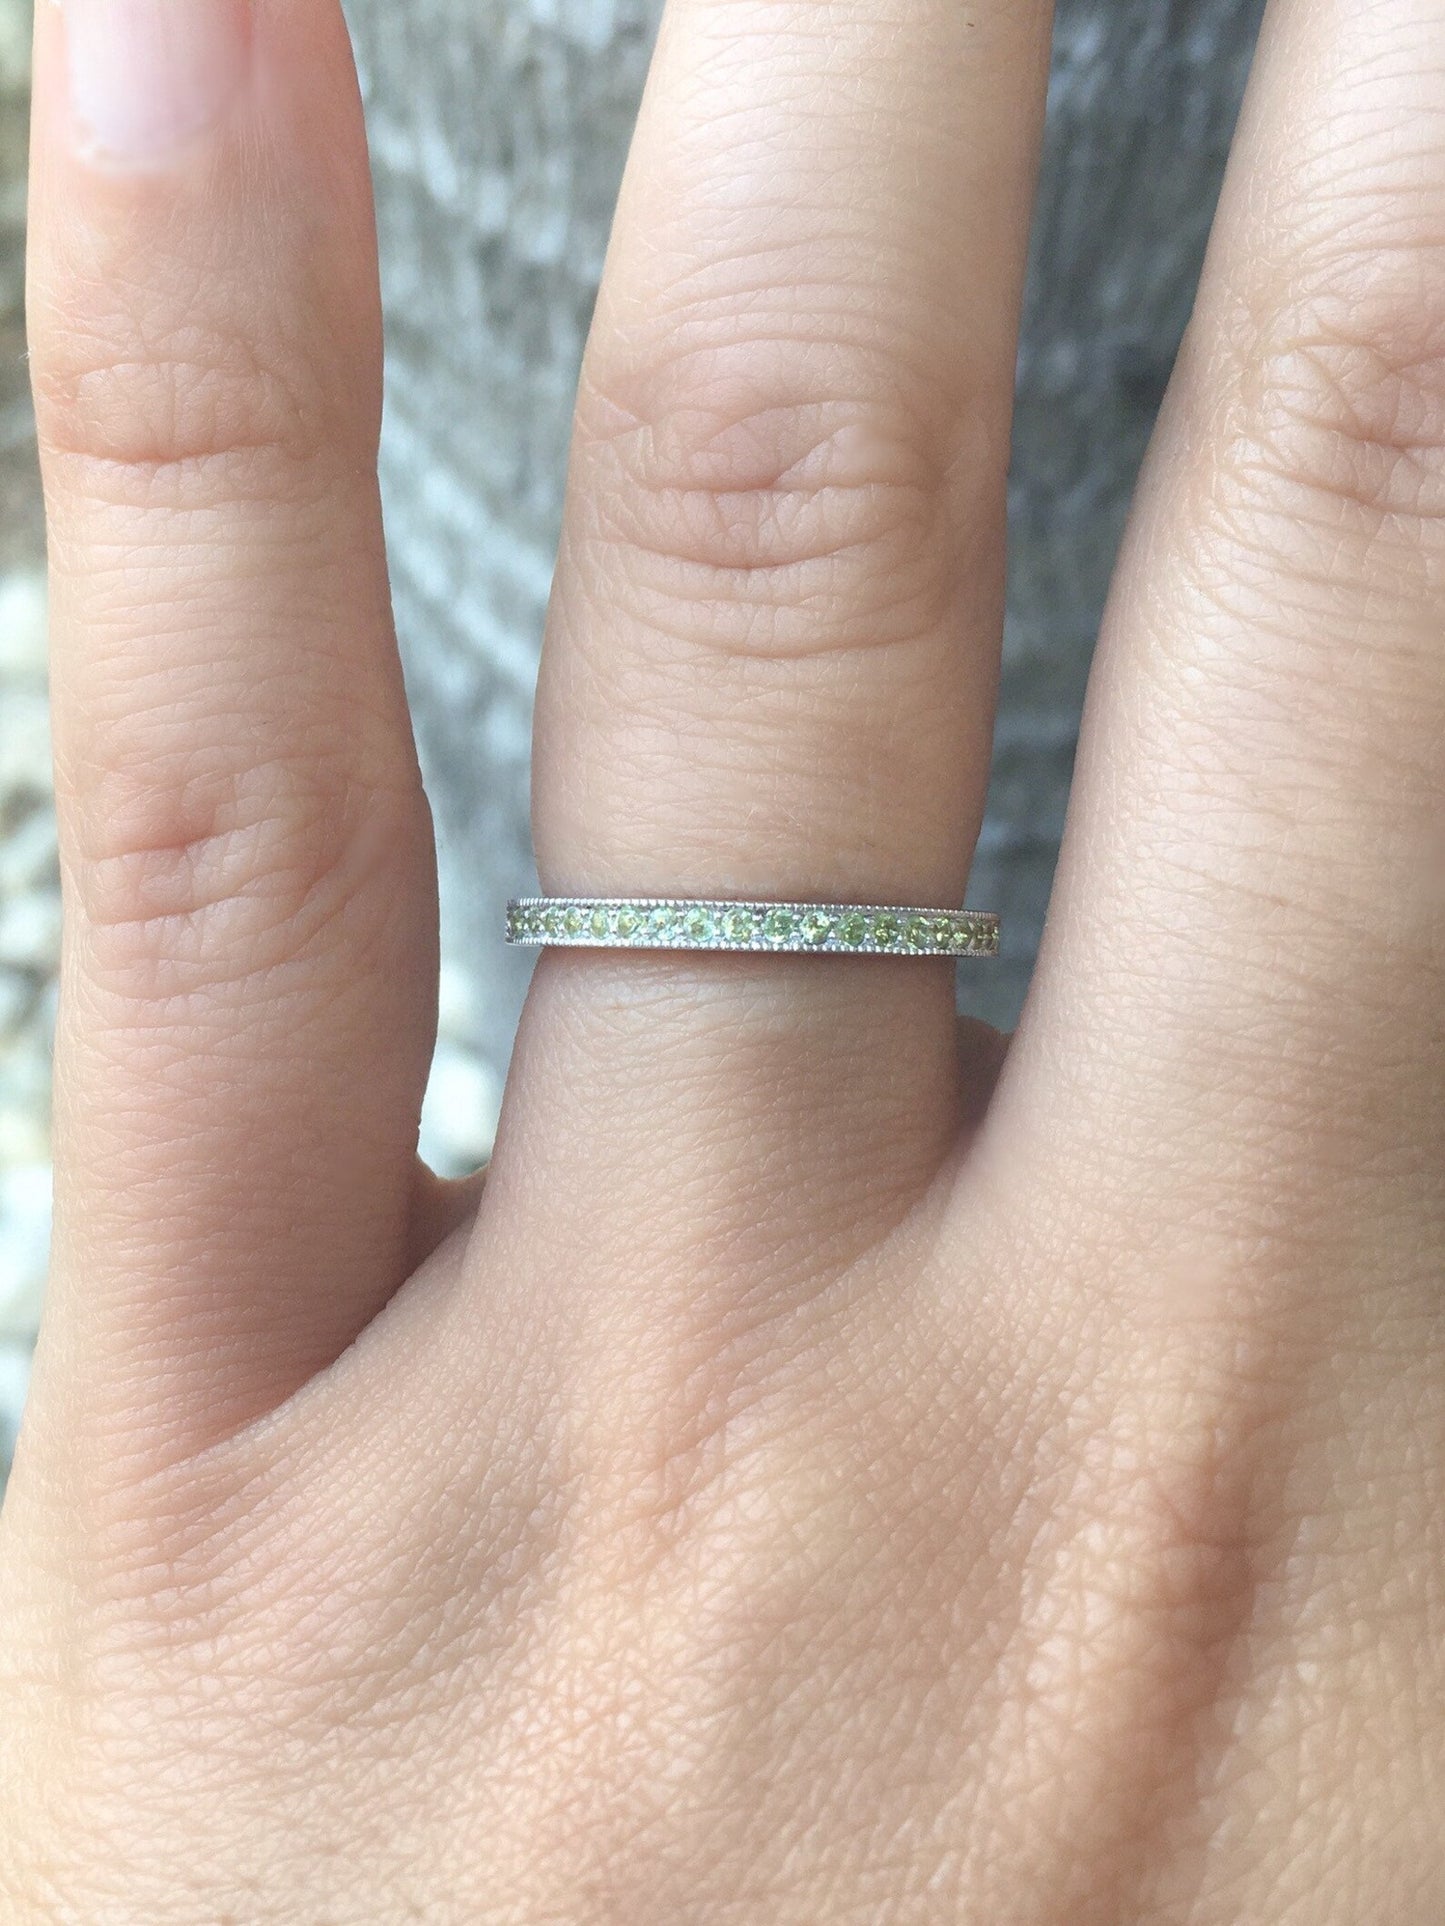 Reserved Listing for Platinum Full Eternity Peridot Band/ Channel Pave, 2mm, Milgrain